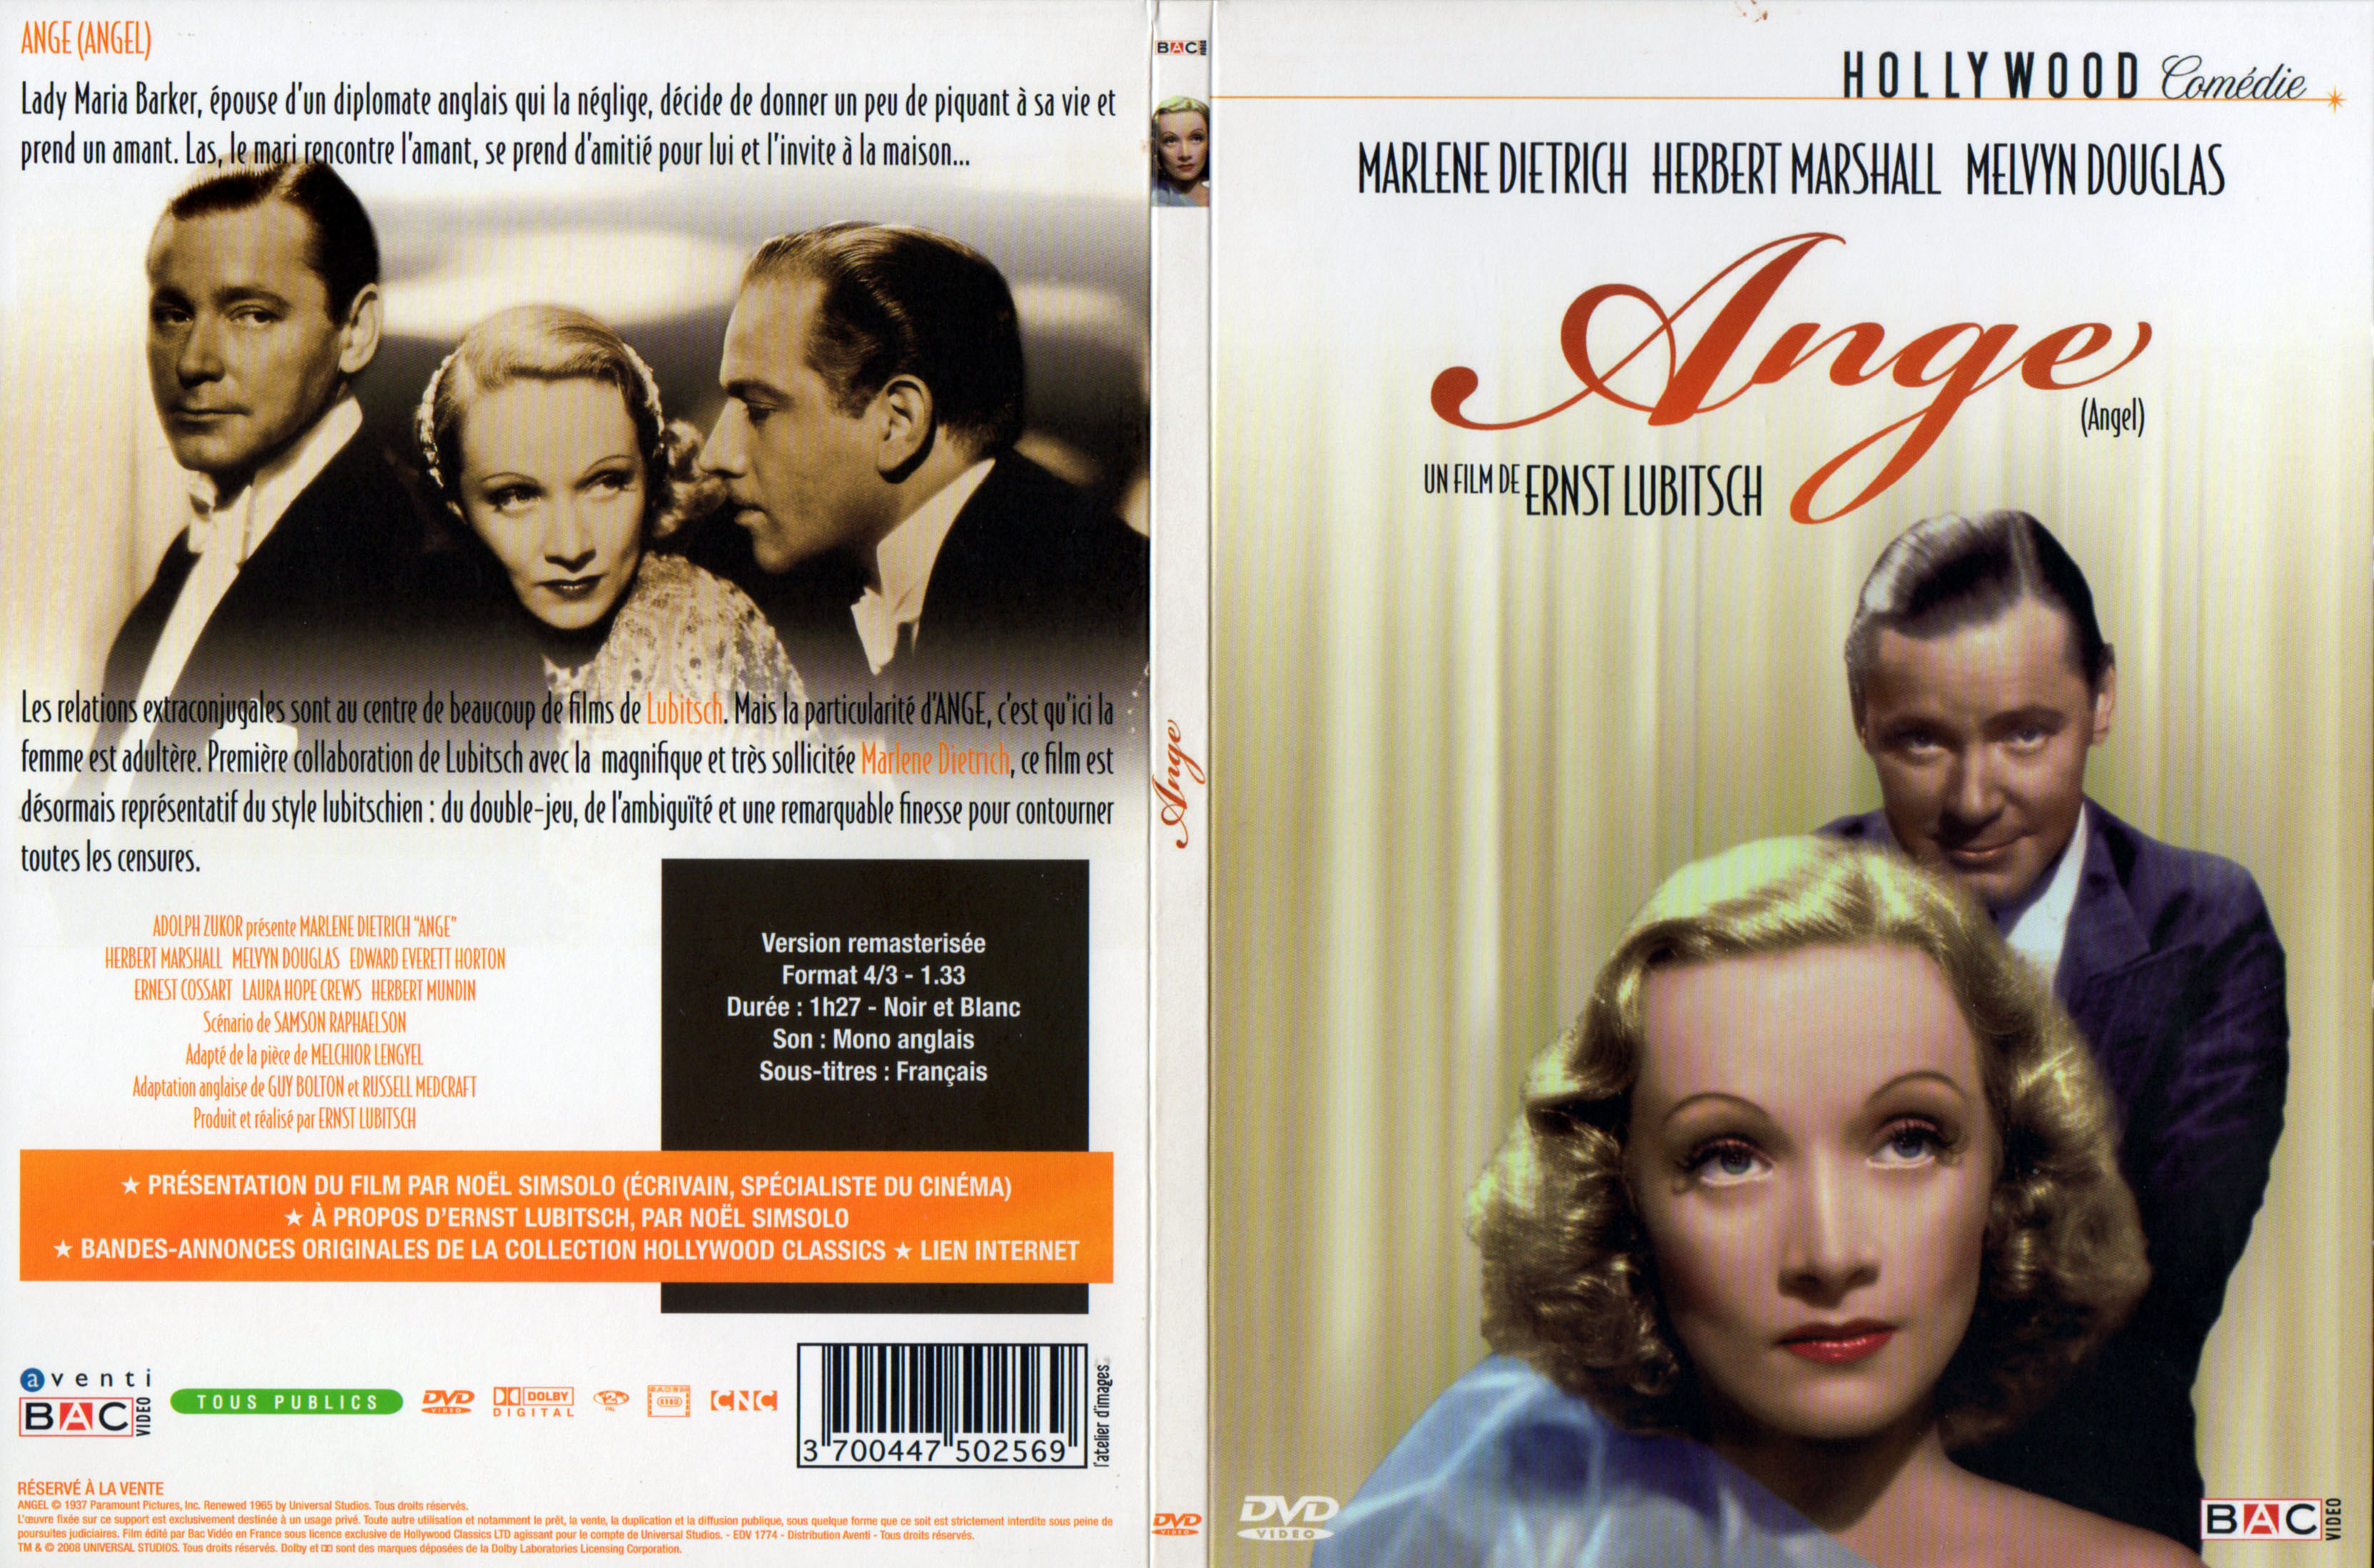 Jaquette DVD Ange